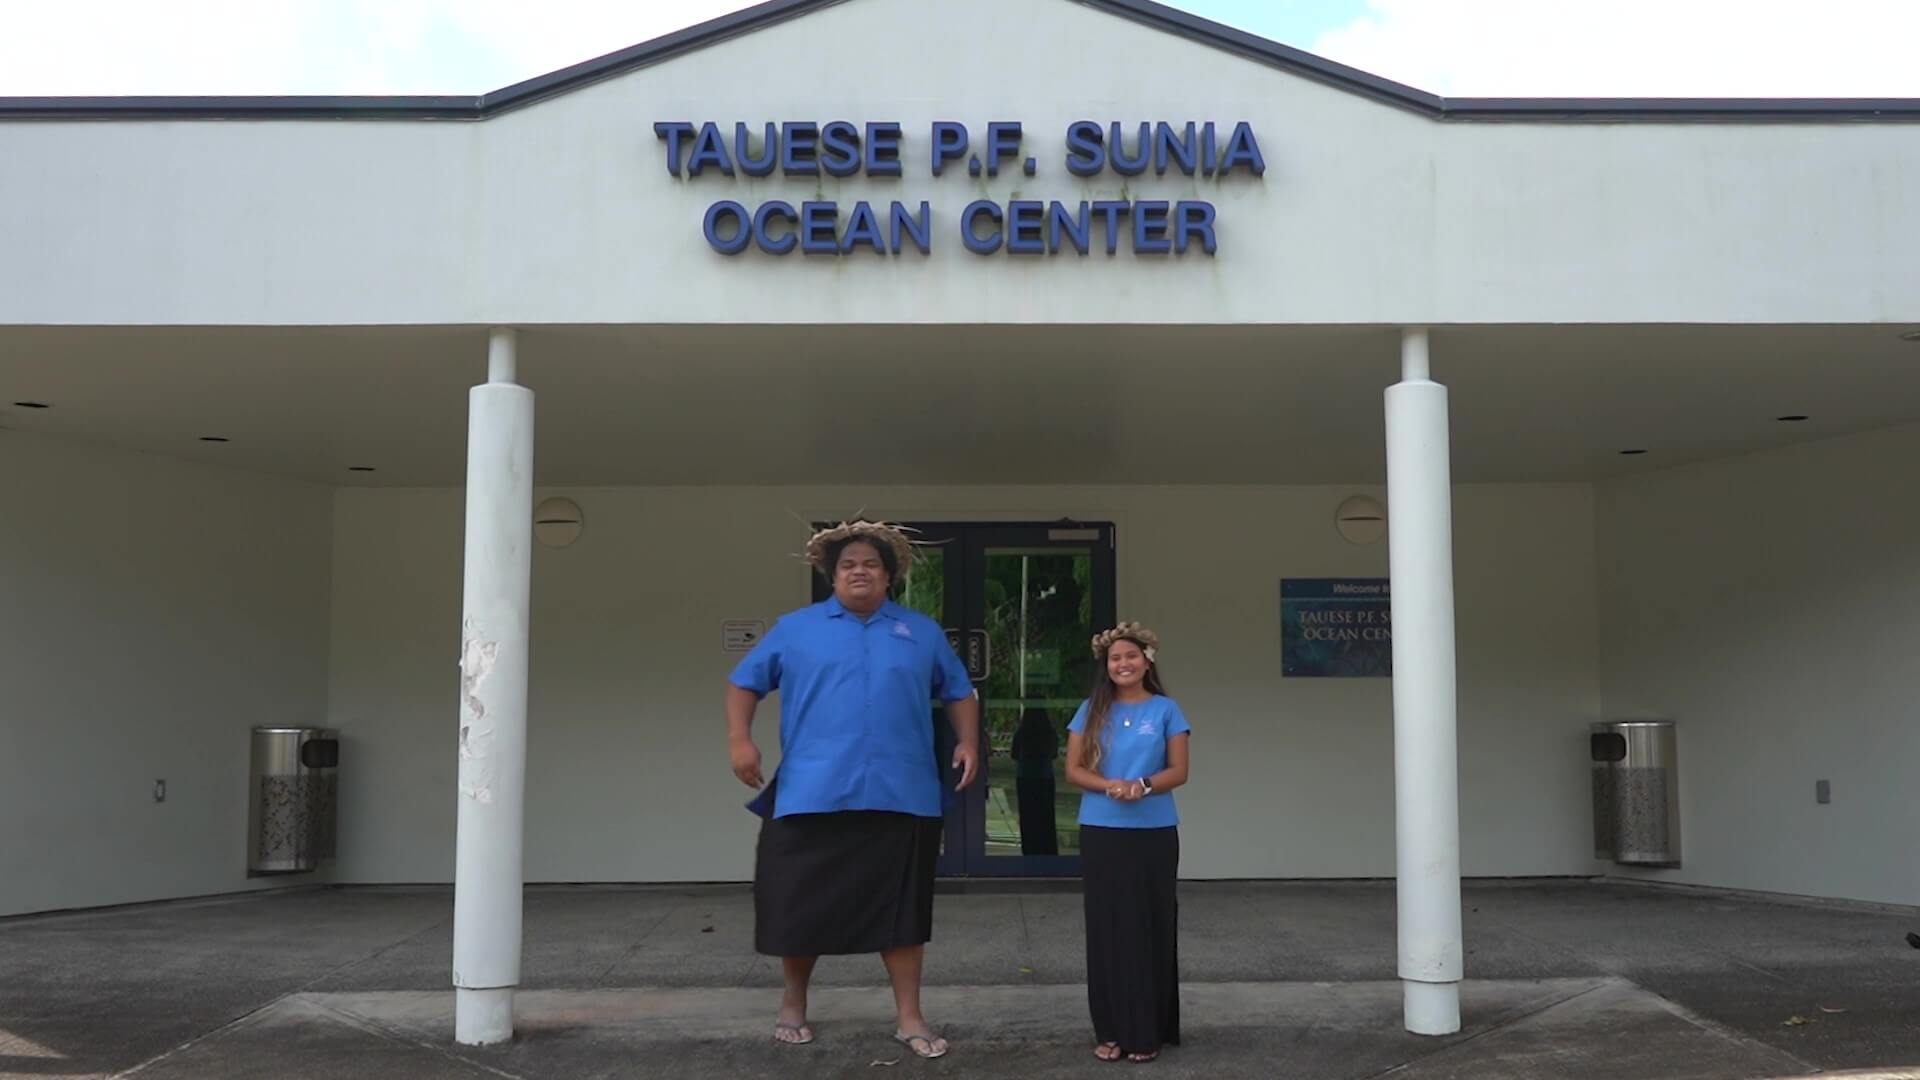 Two People Standing in front of Tauese P.F. Sunia Ocean Center